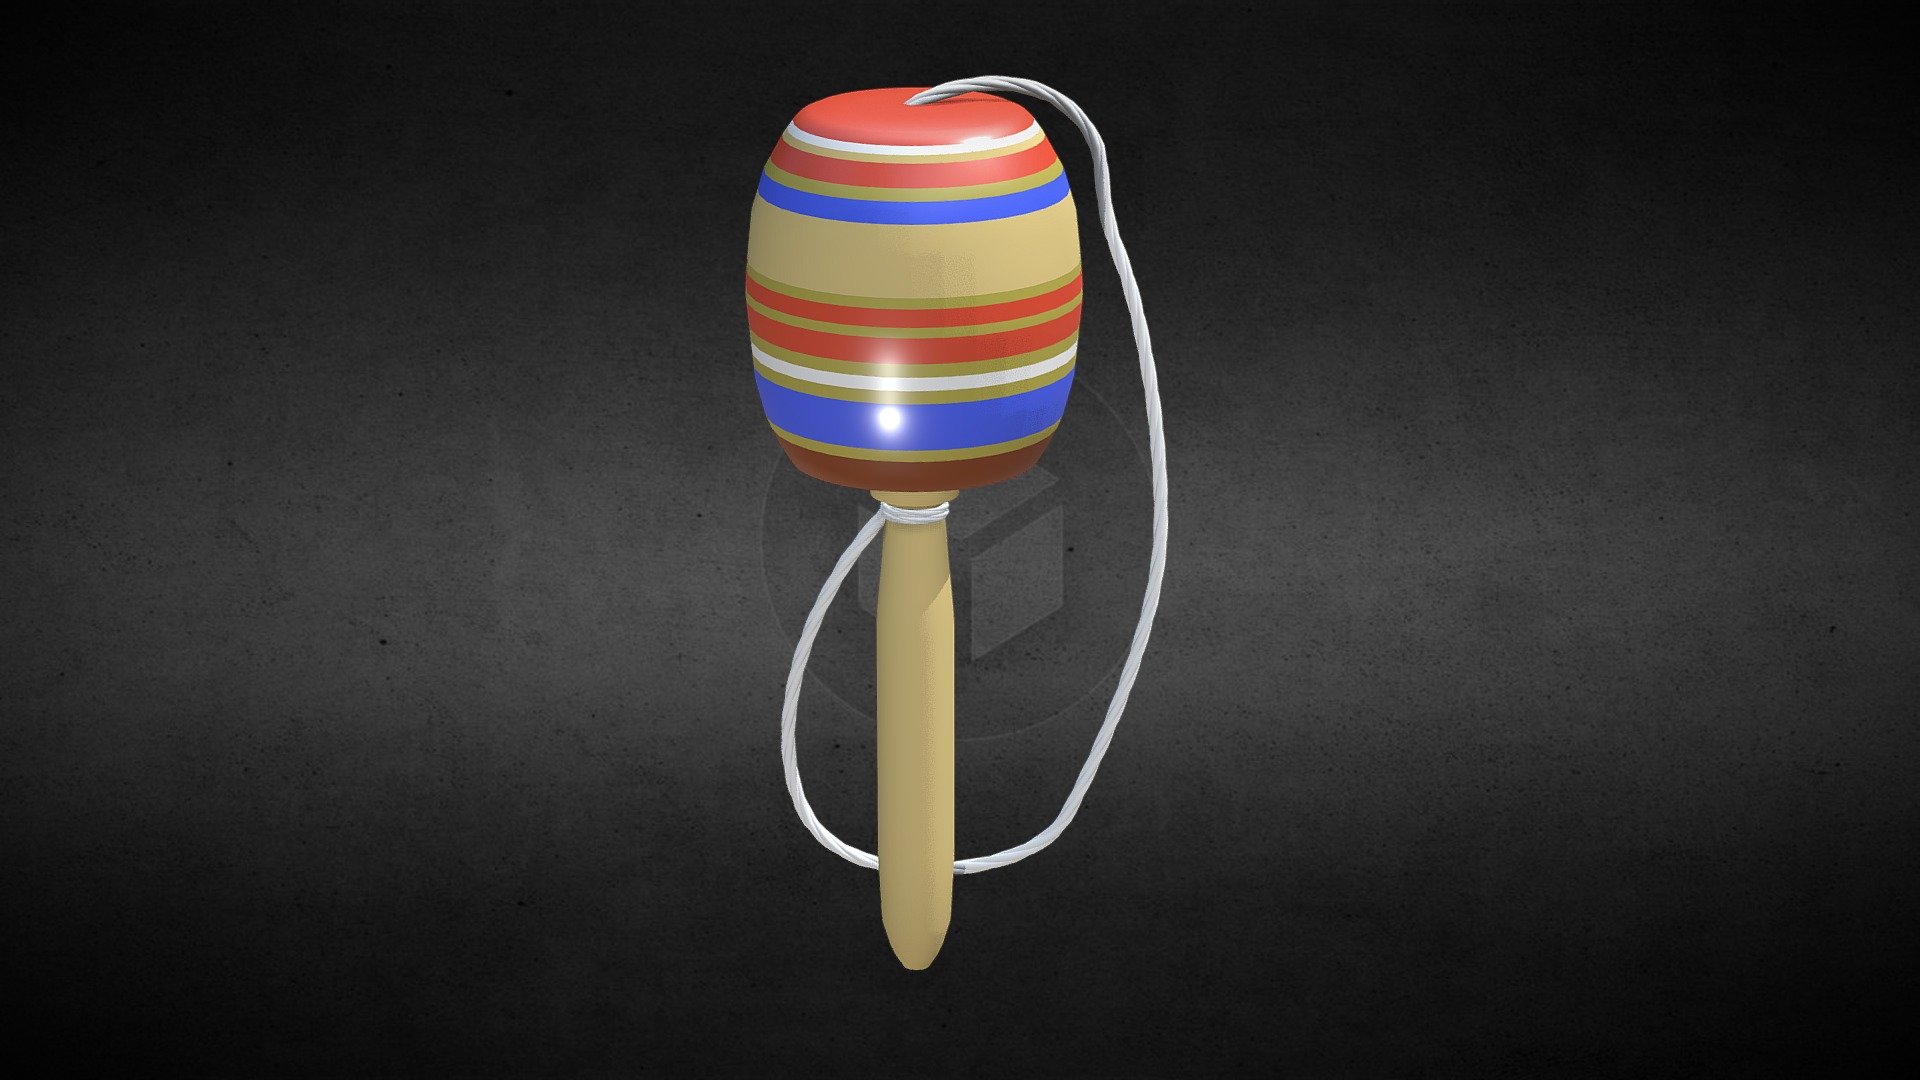 Balero - Mexican Toy - NovRender 04 - Toy - 3D model by Xirion11 3d model